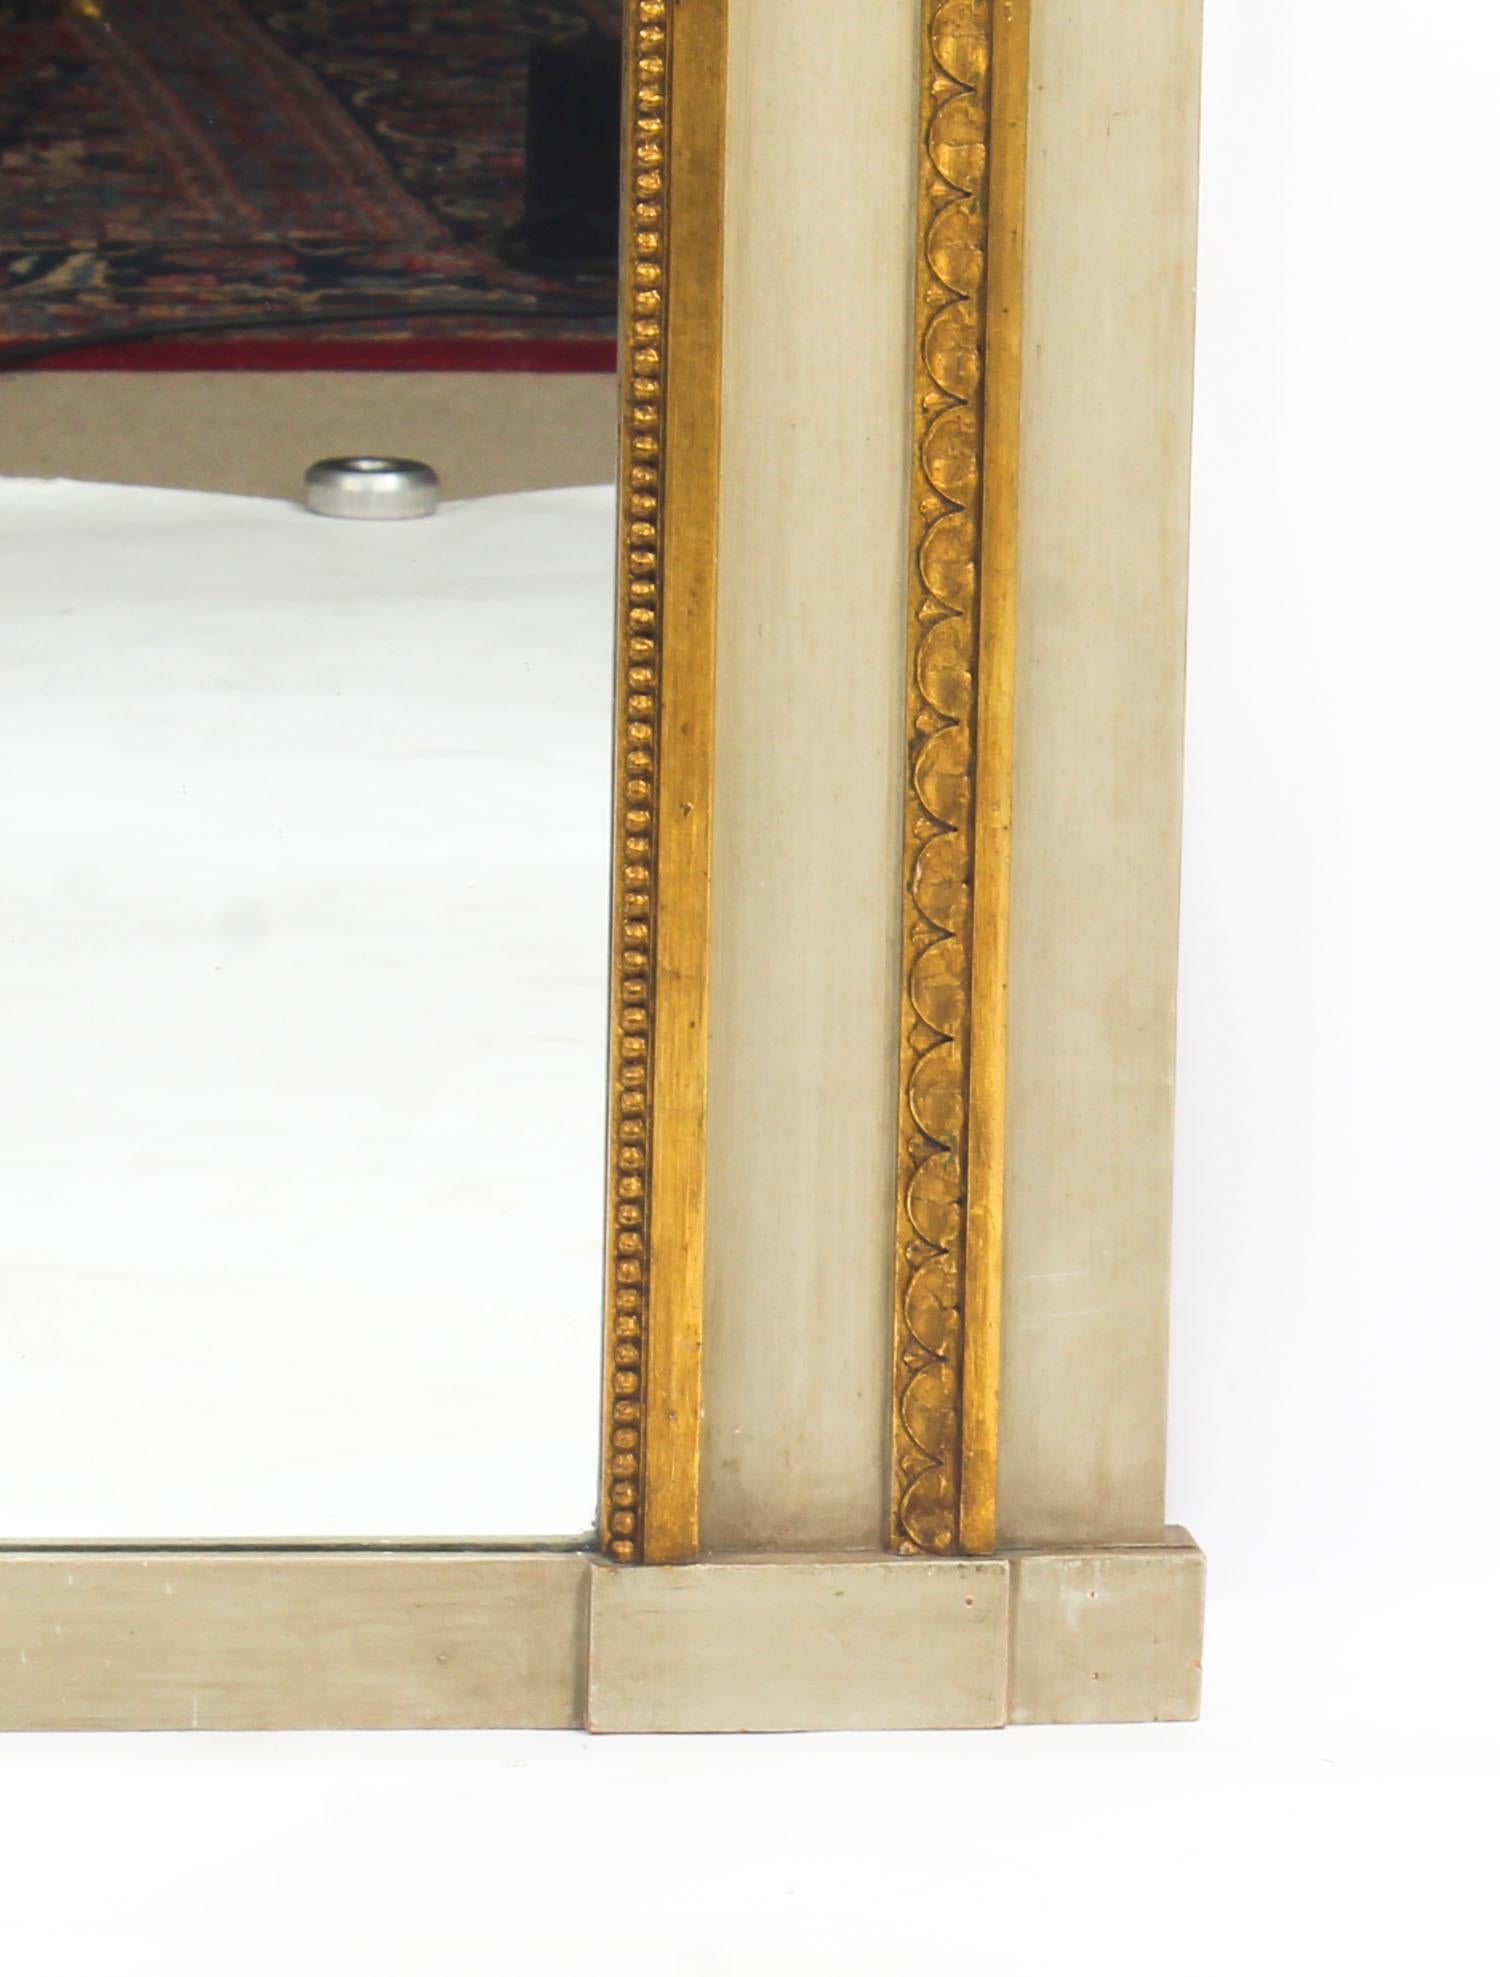 A beautiful Antique French painted and parcel-gilt trumeau mirror, late 19th century in date.

The mirror features a central shaped panel with a carved zigzag frame with a beautiful oil painting depicting an Italianate scene of a courting couple